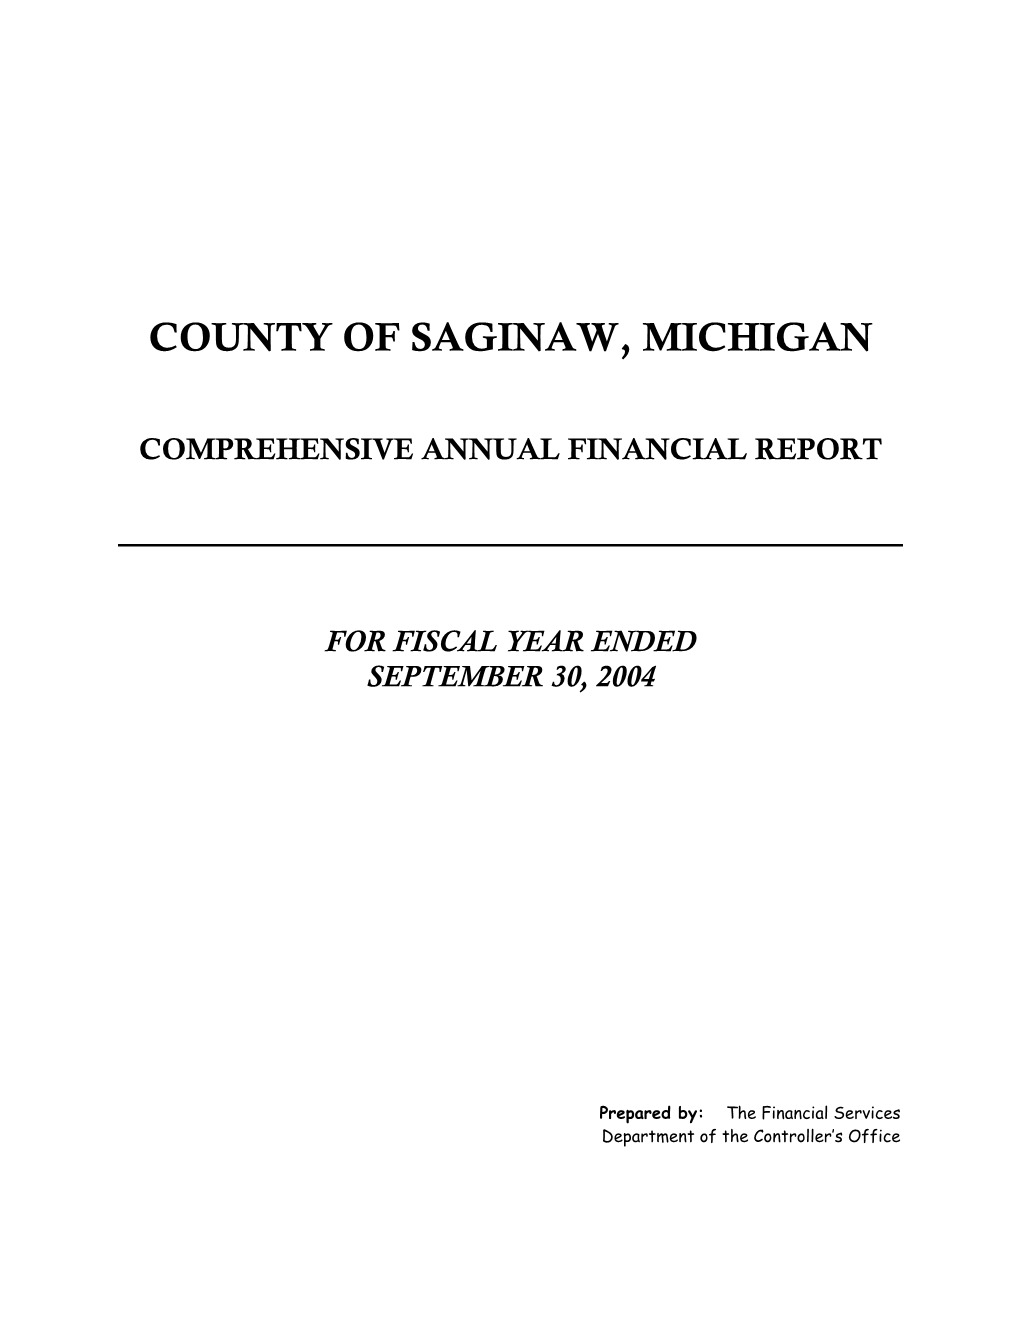 Comprehensive Annual Financial Report for Fiscal Year Ended September 30